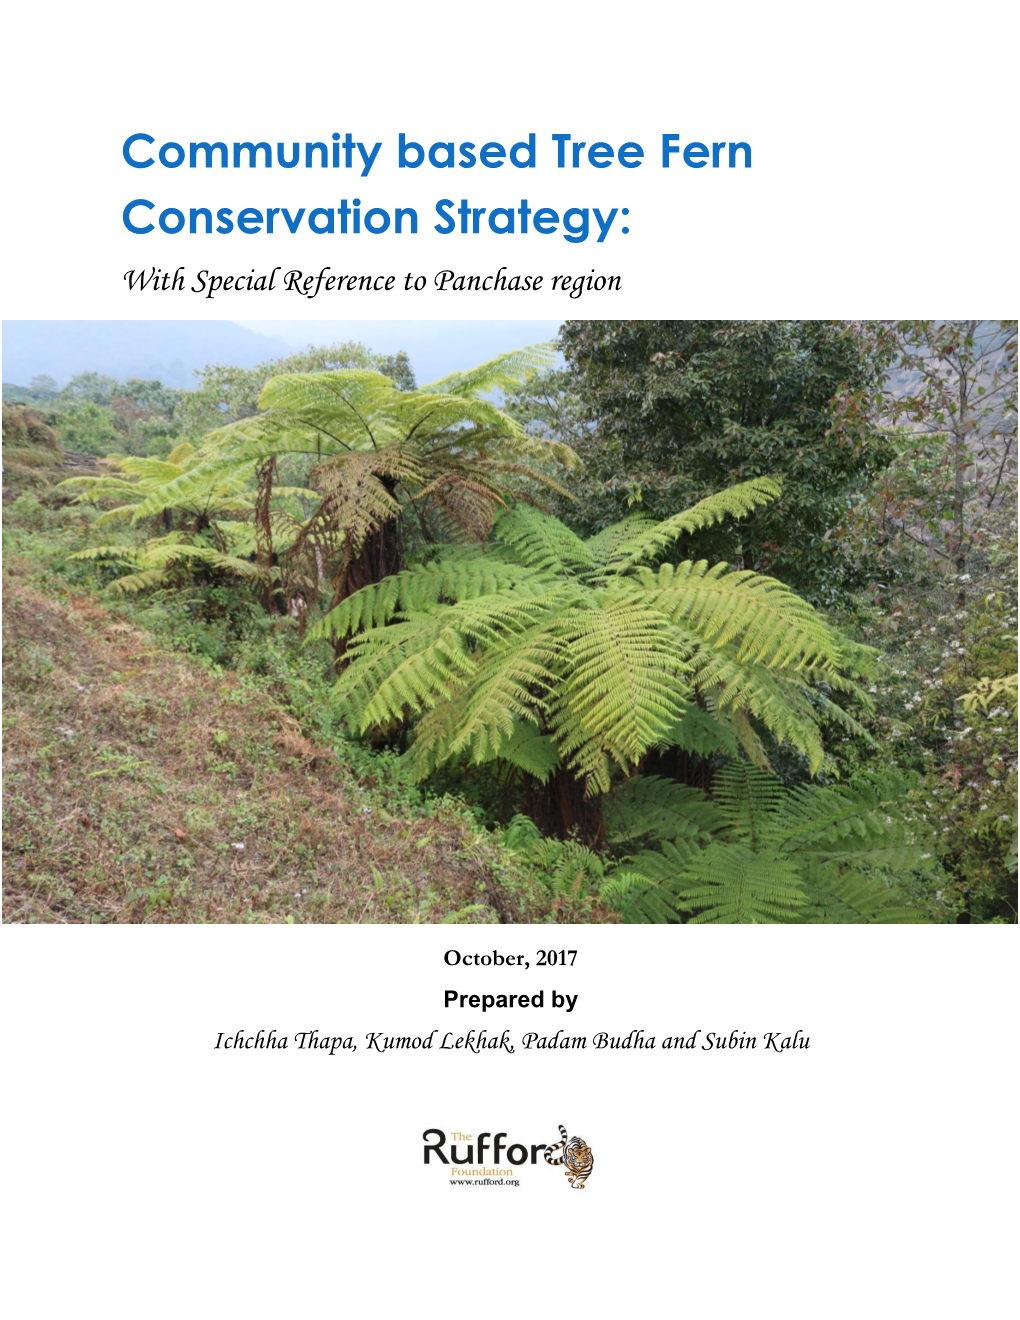 COMMUNITY Based CONSERVATION STRATEGY for TREE FERN with SPECIAL REFERENCE to PANCHASE REGION